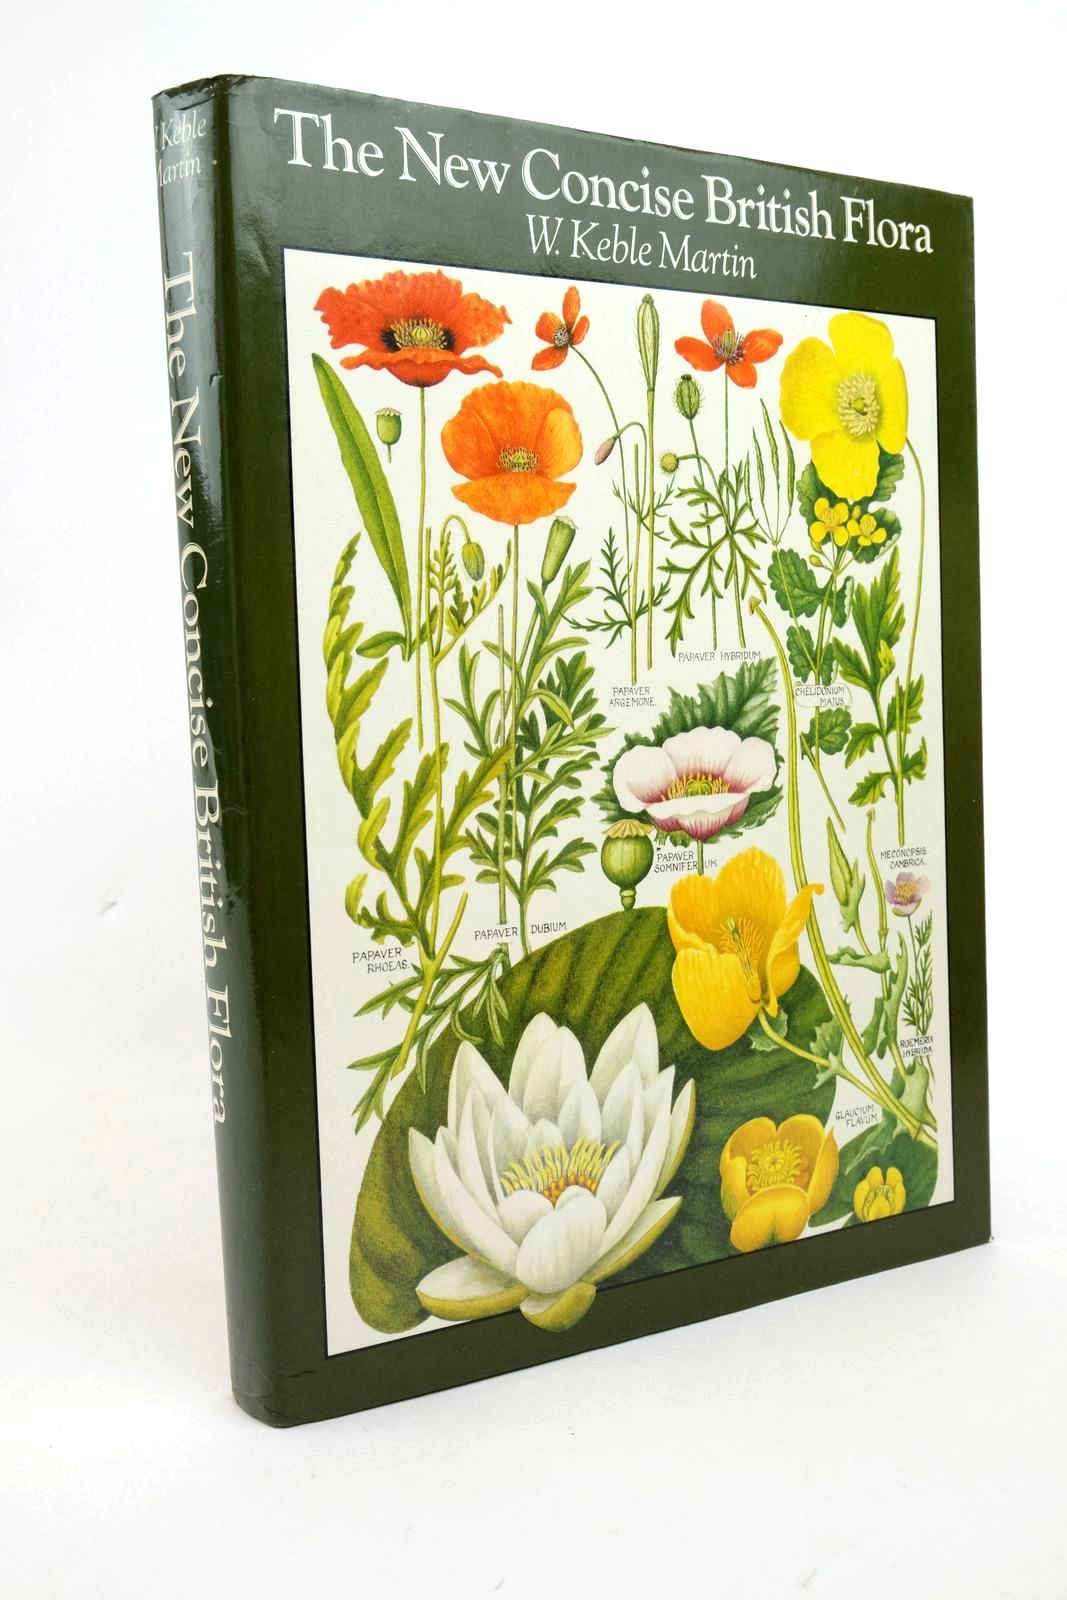 Photo of THE NEW CONCISE BRITISH FLORA written by Martin, W. Keble Kent, Douglas H. published by Ebury Press (STOCK CODE: 1322811)  for sale by Stella & Rose's Books